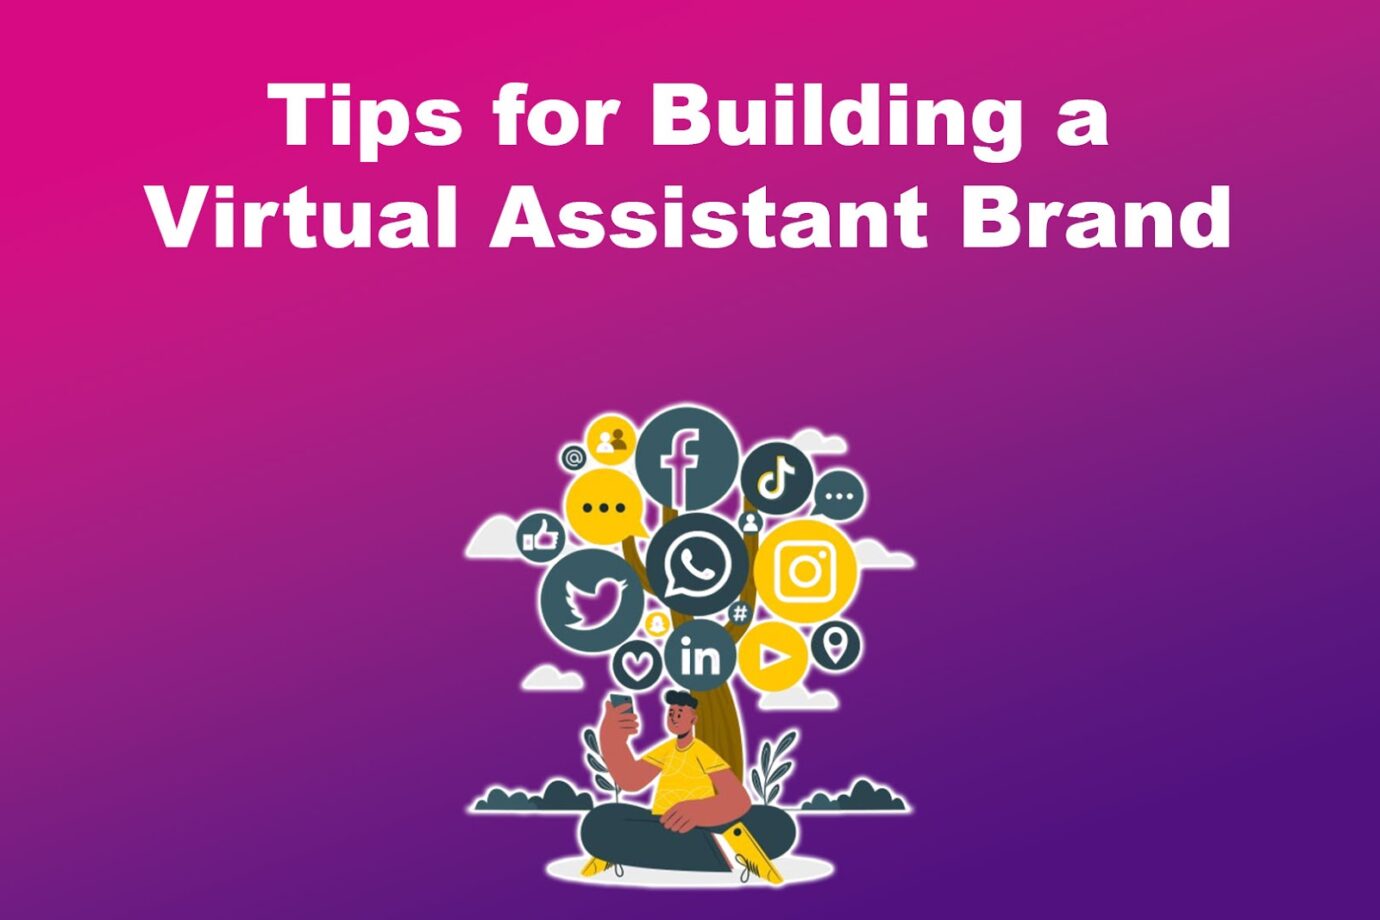 How to Build a Virtual Assistant Brand